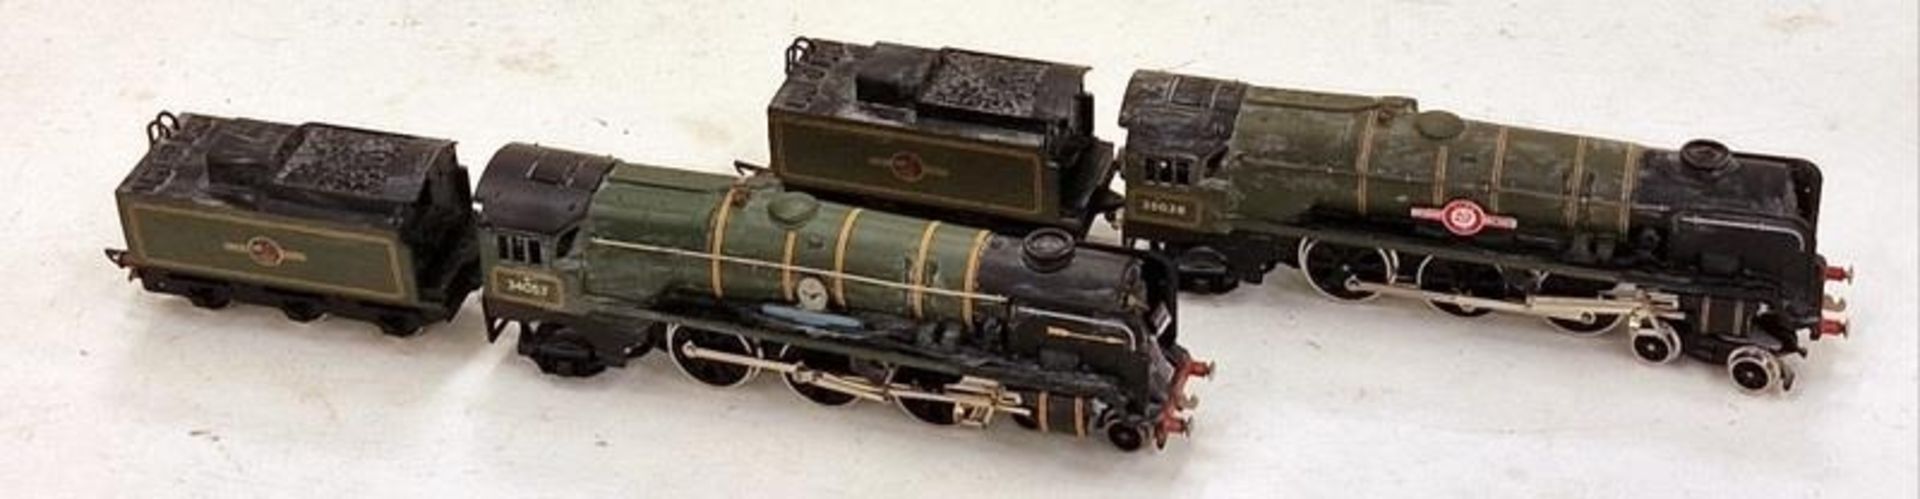 Two OO Gauge locomotives and tenders to include British Railways Sir Keith Park 34053 and Merchant